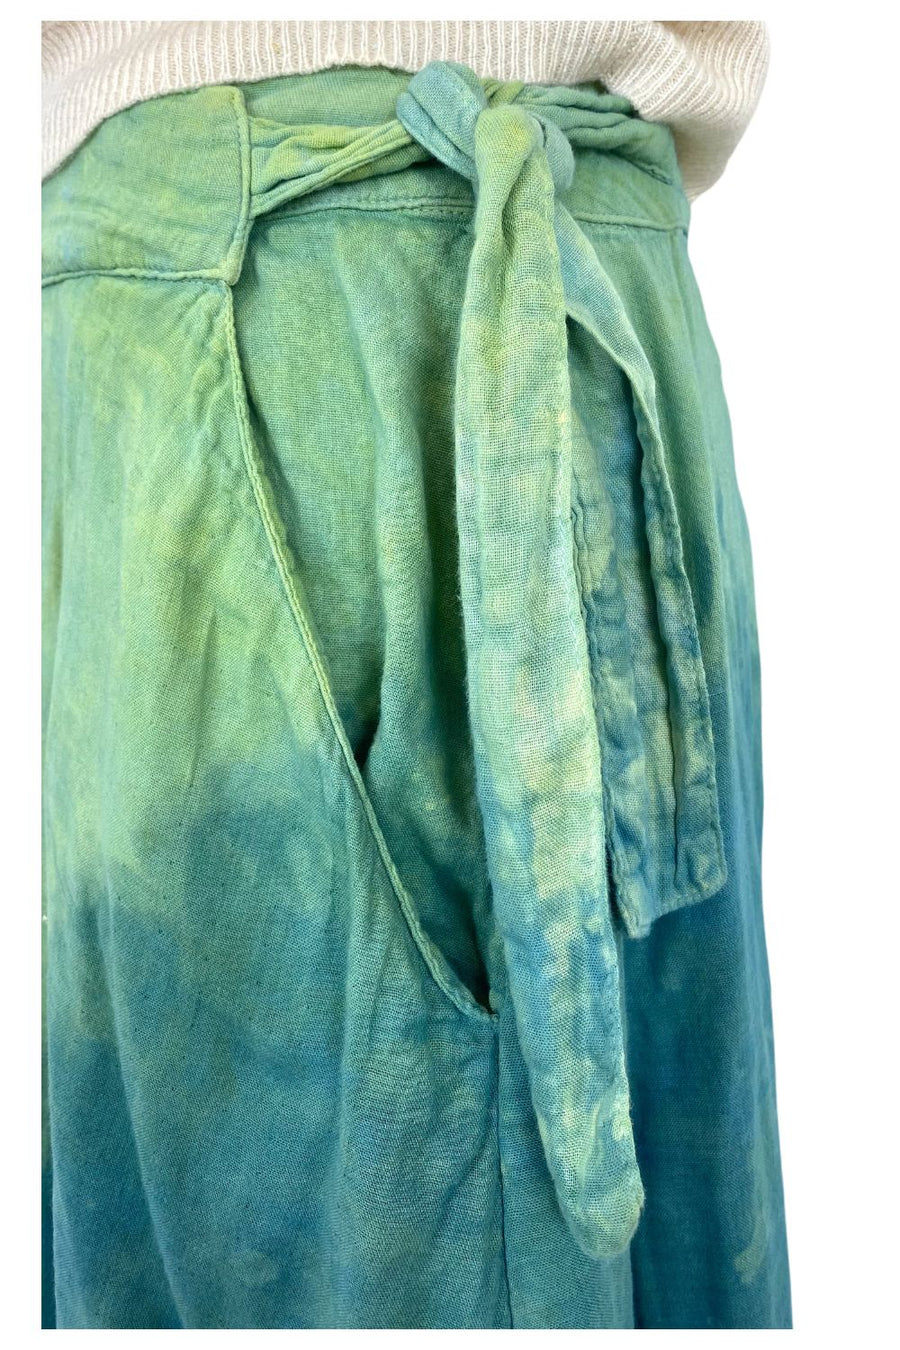 Carina Skirt in Green | Organic Cotton Double Gauze in XS Only